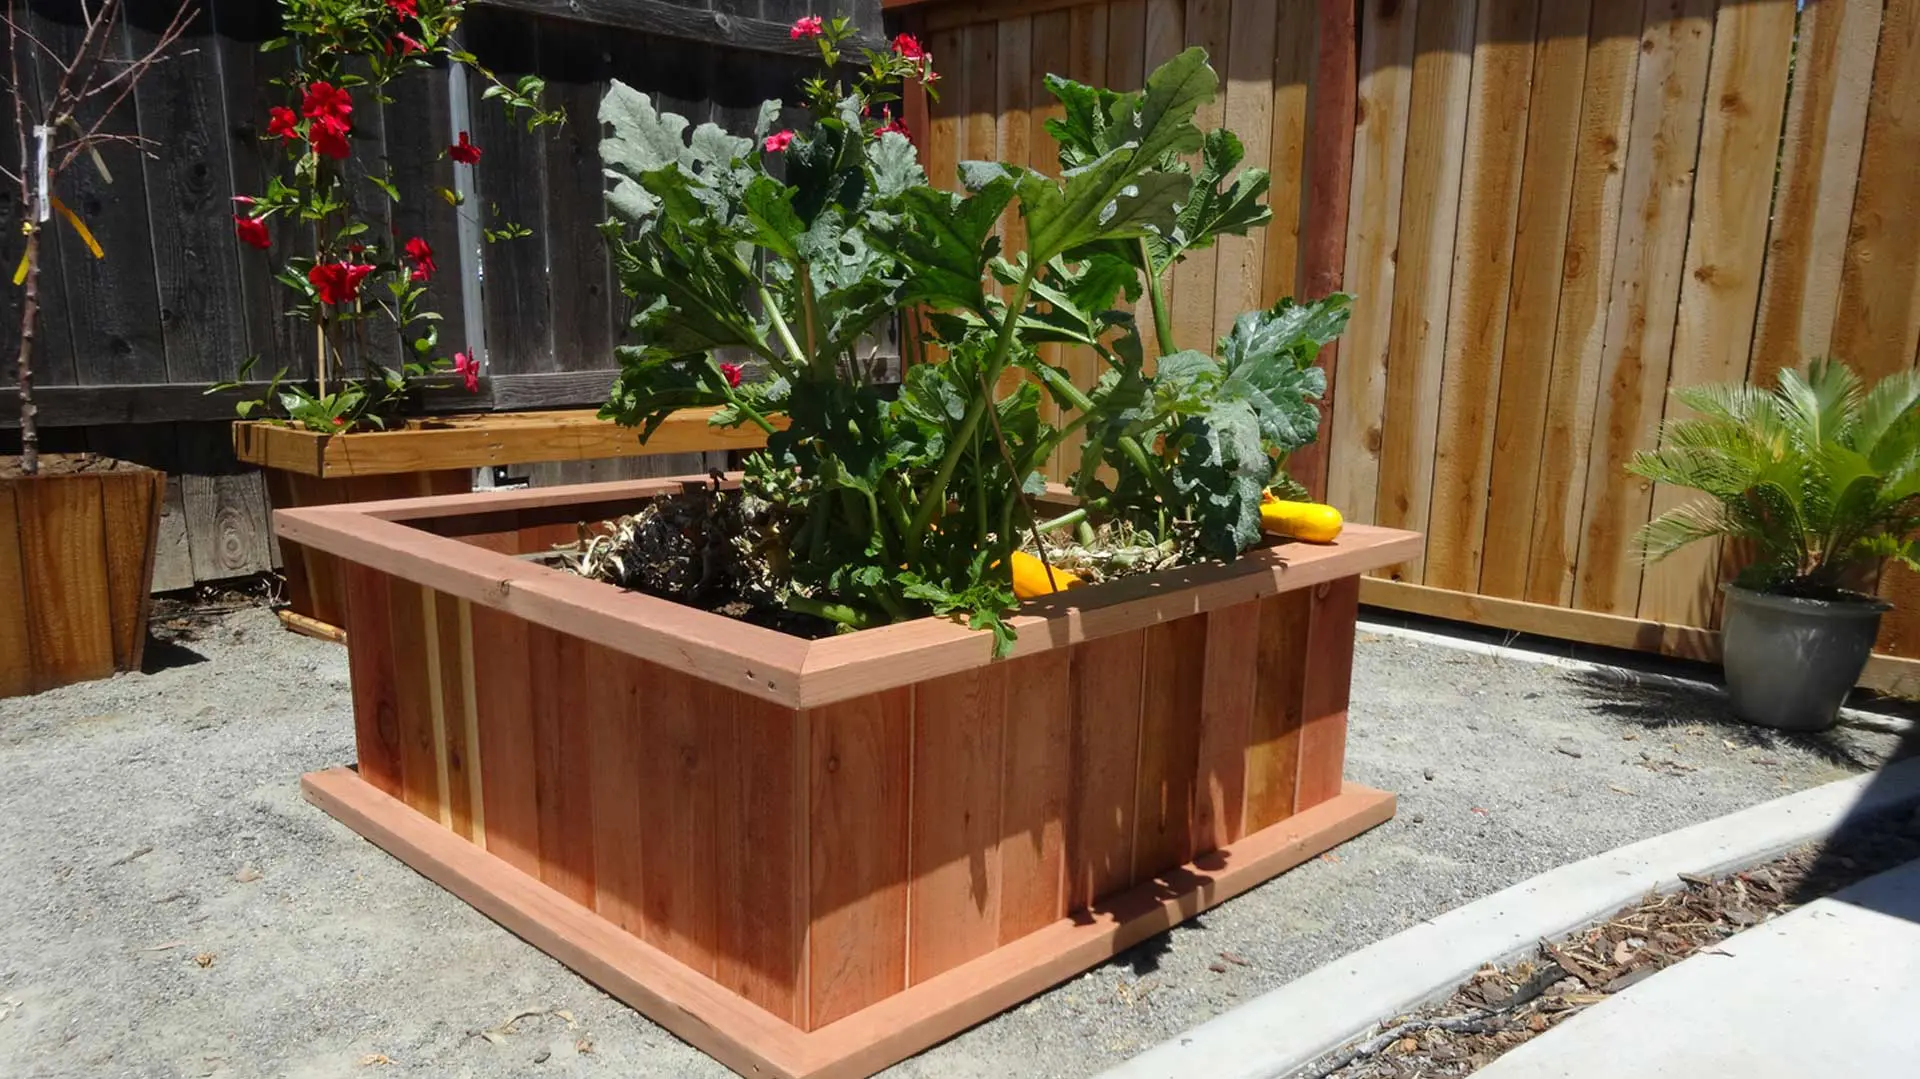 A wooden planter with vegetables in it.